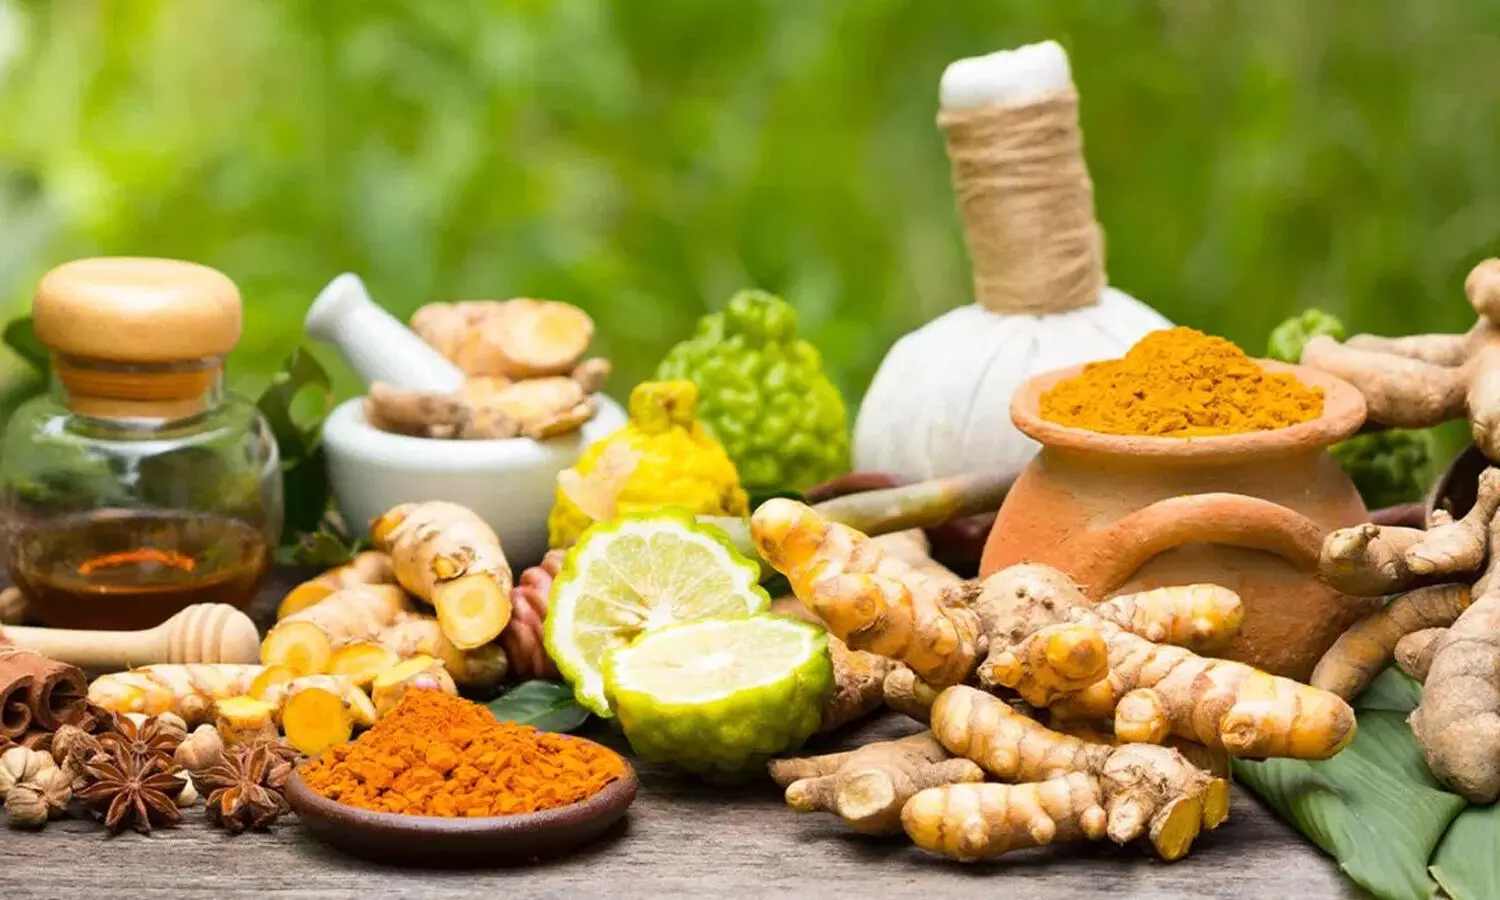 ICMR to study efficacy of Ayurvedic medicine touted as miracle cure for Covid-19